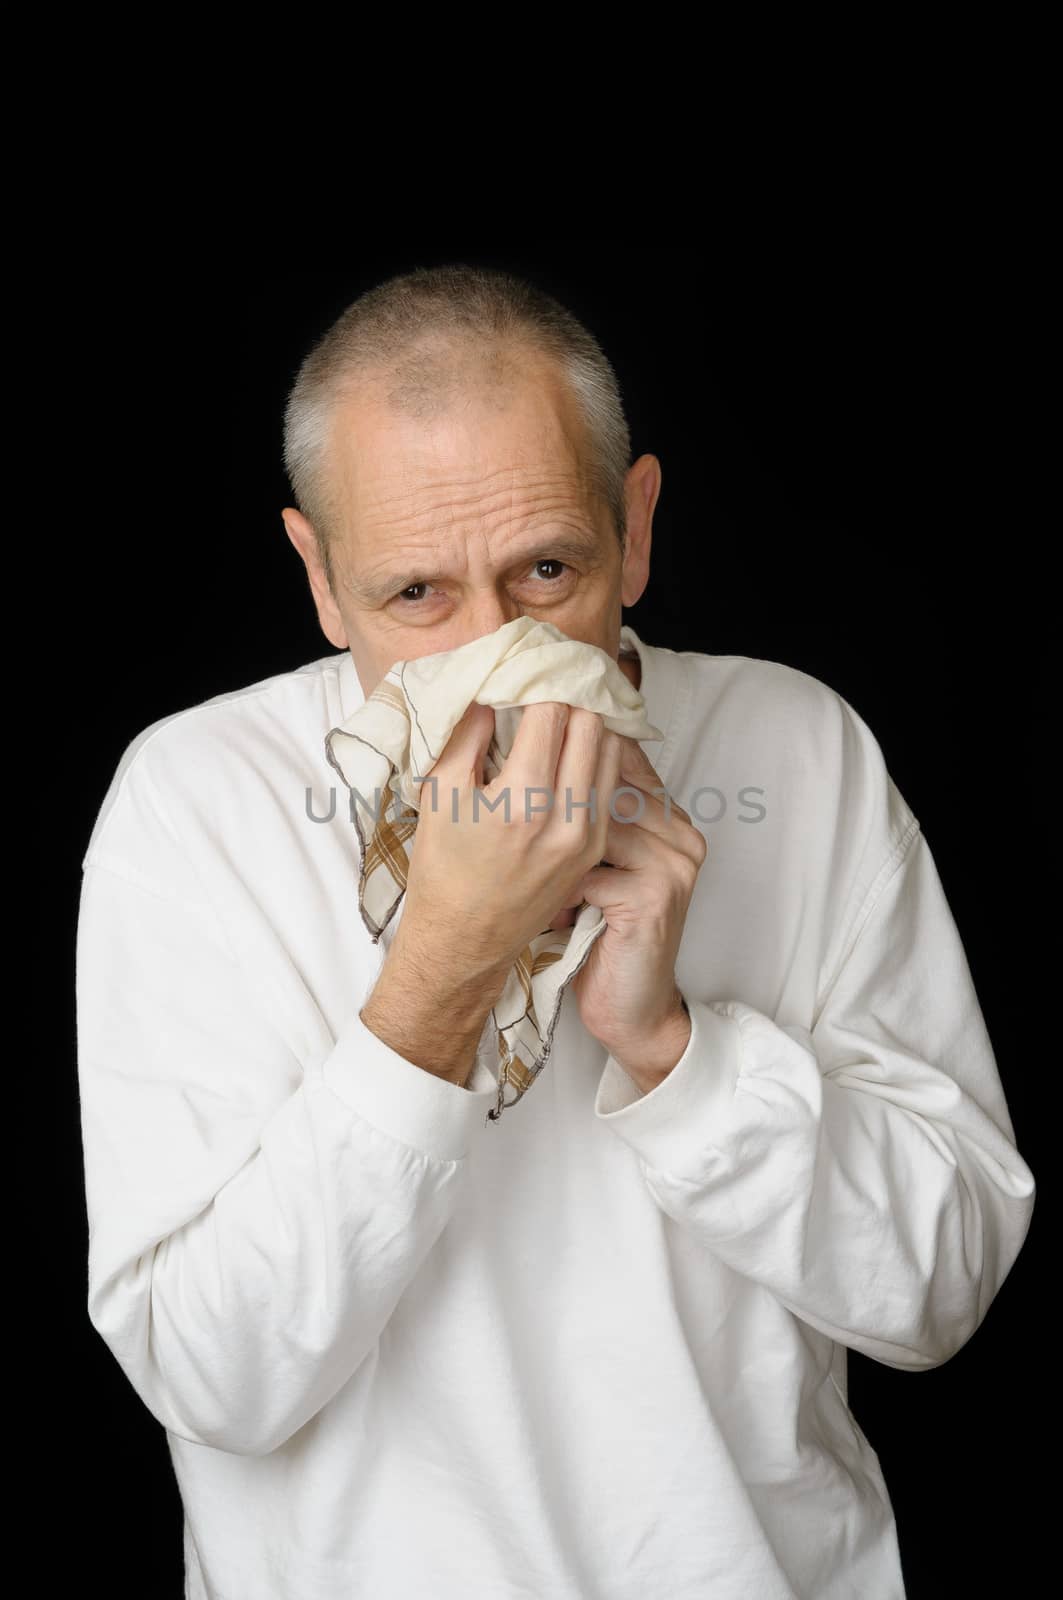 Sick Man with Cold holding handkerchief by MaxalTamor